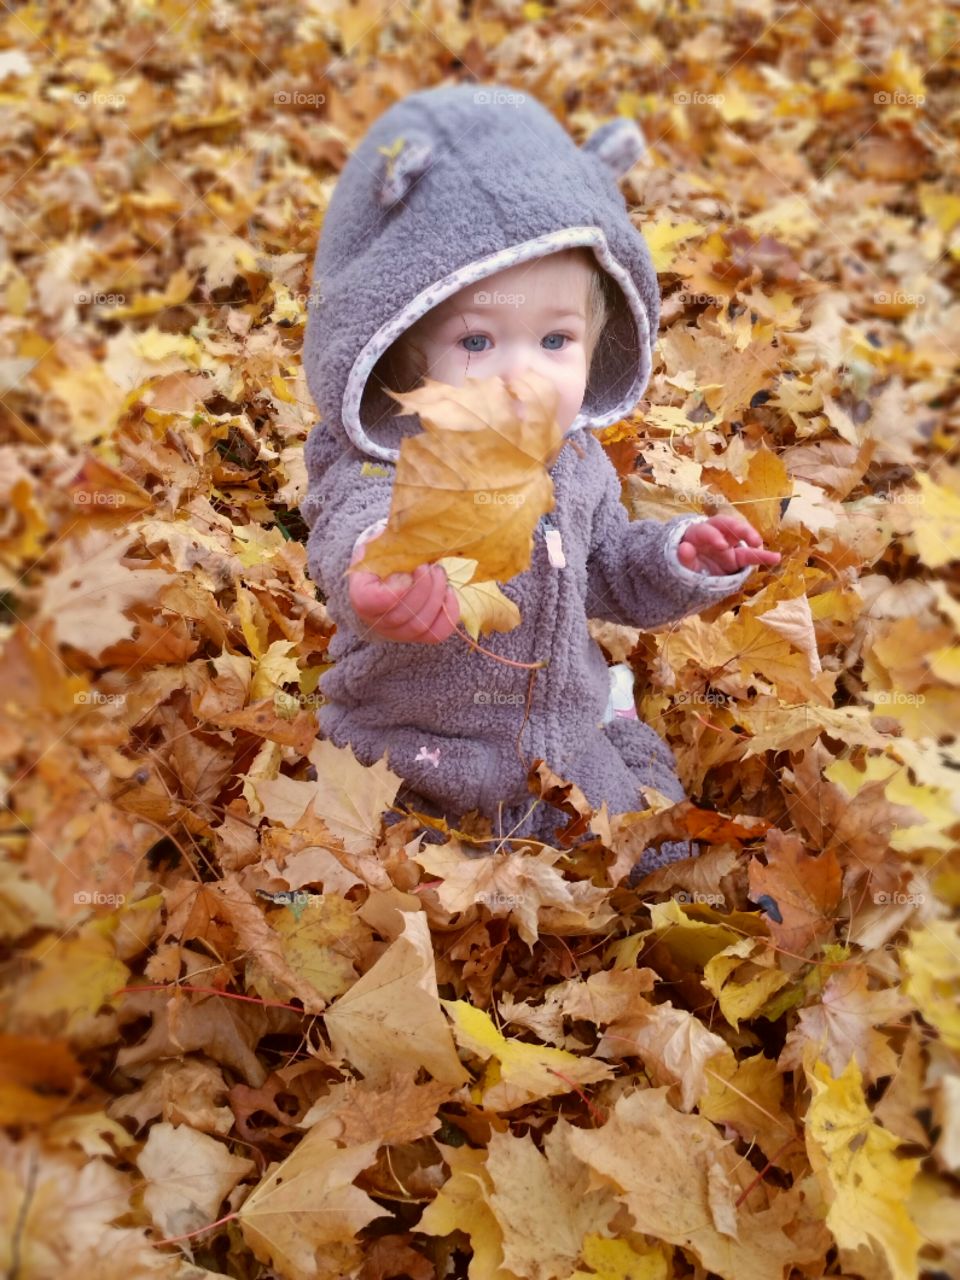 Cute baby sitting on autumn leaves